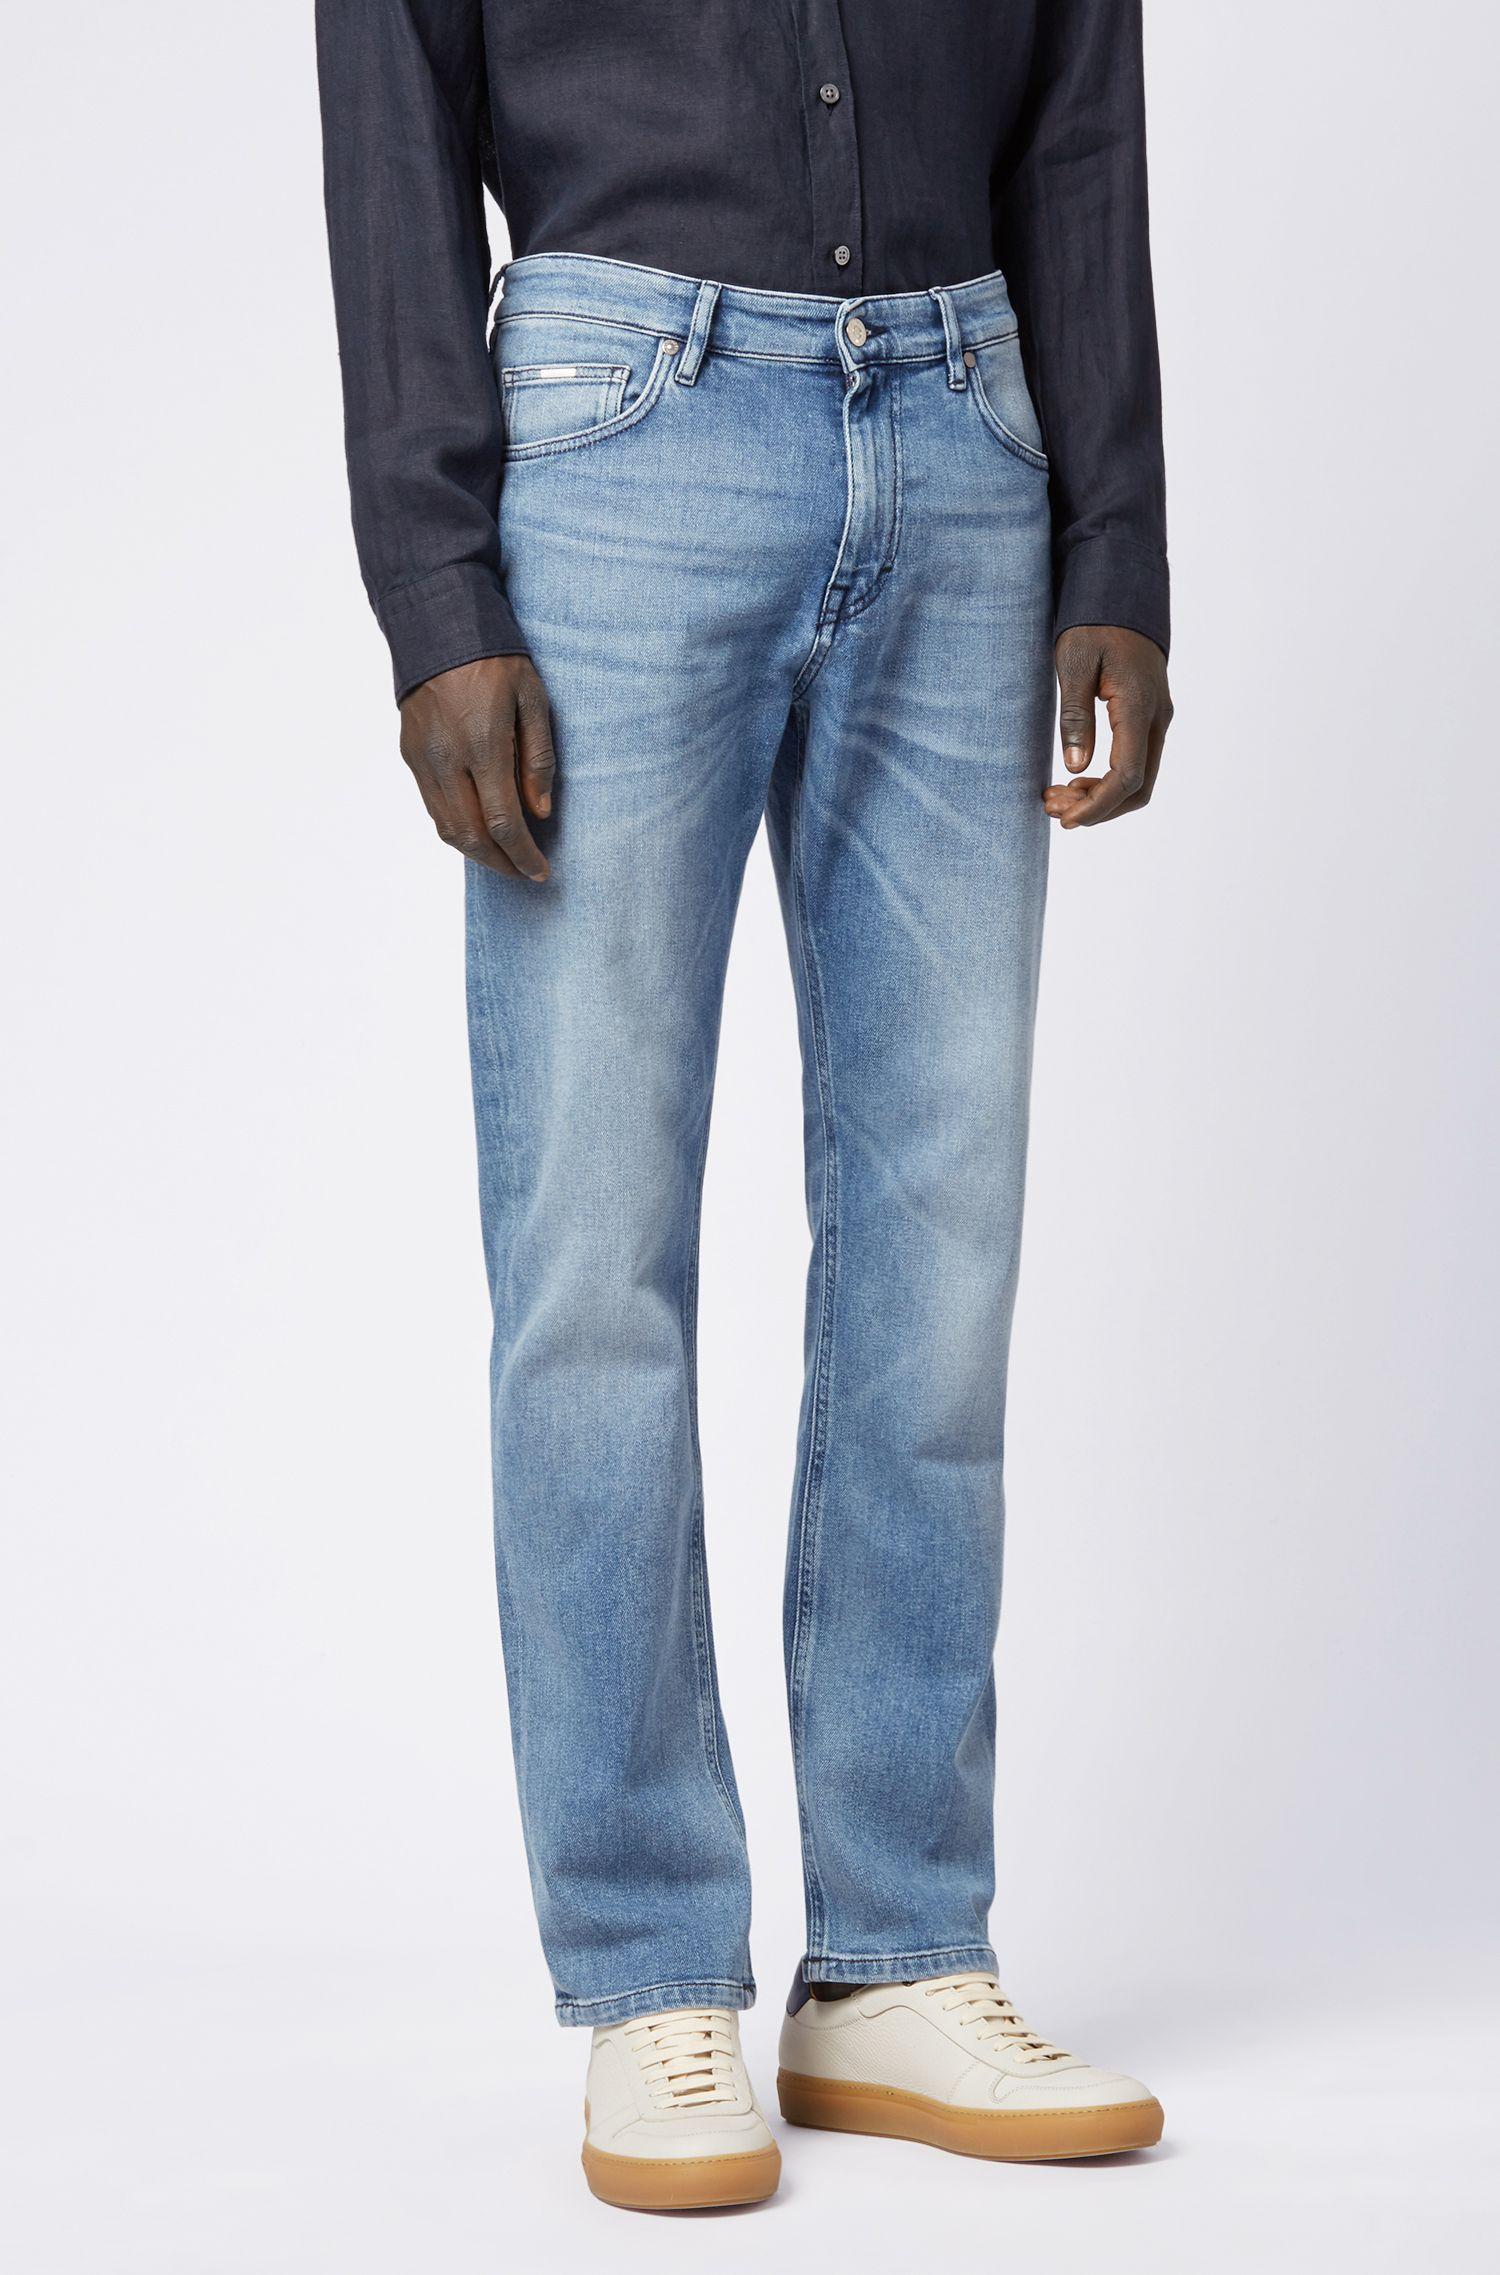 BOSS Relaxed-fit Jeans In Bright-blue Bci Denim for Men - Lyst